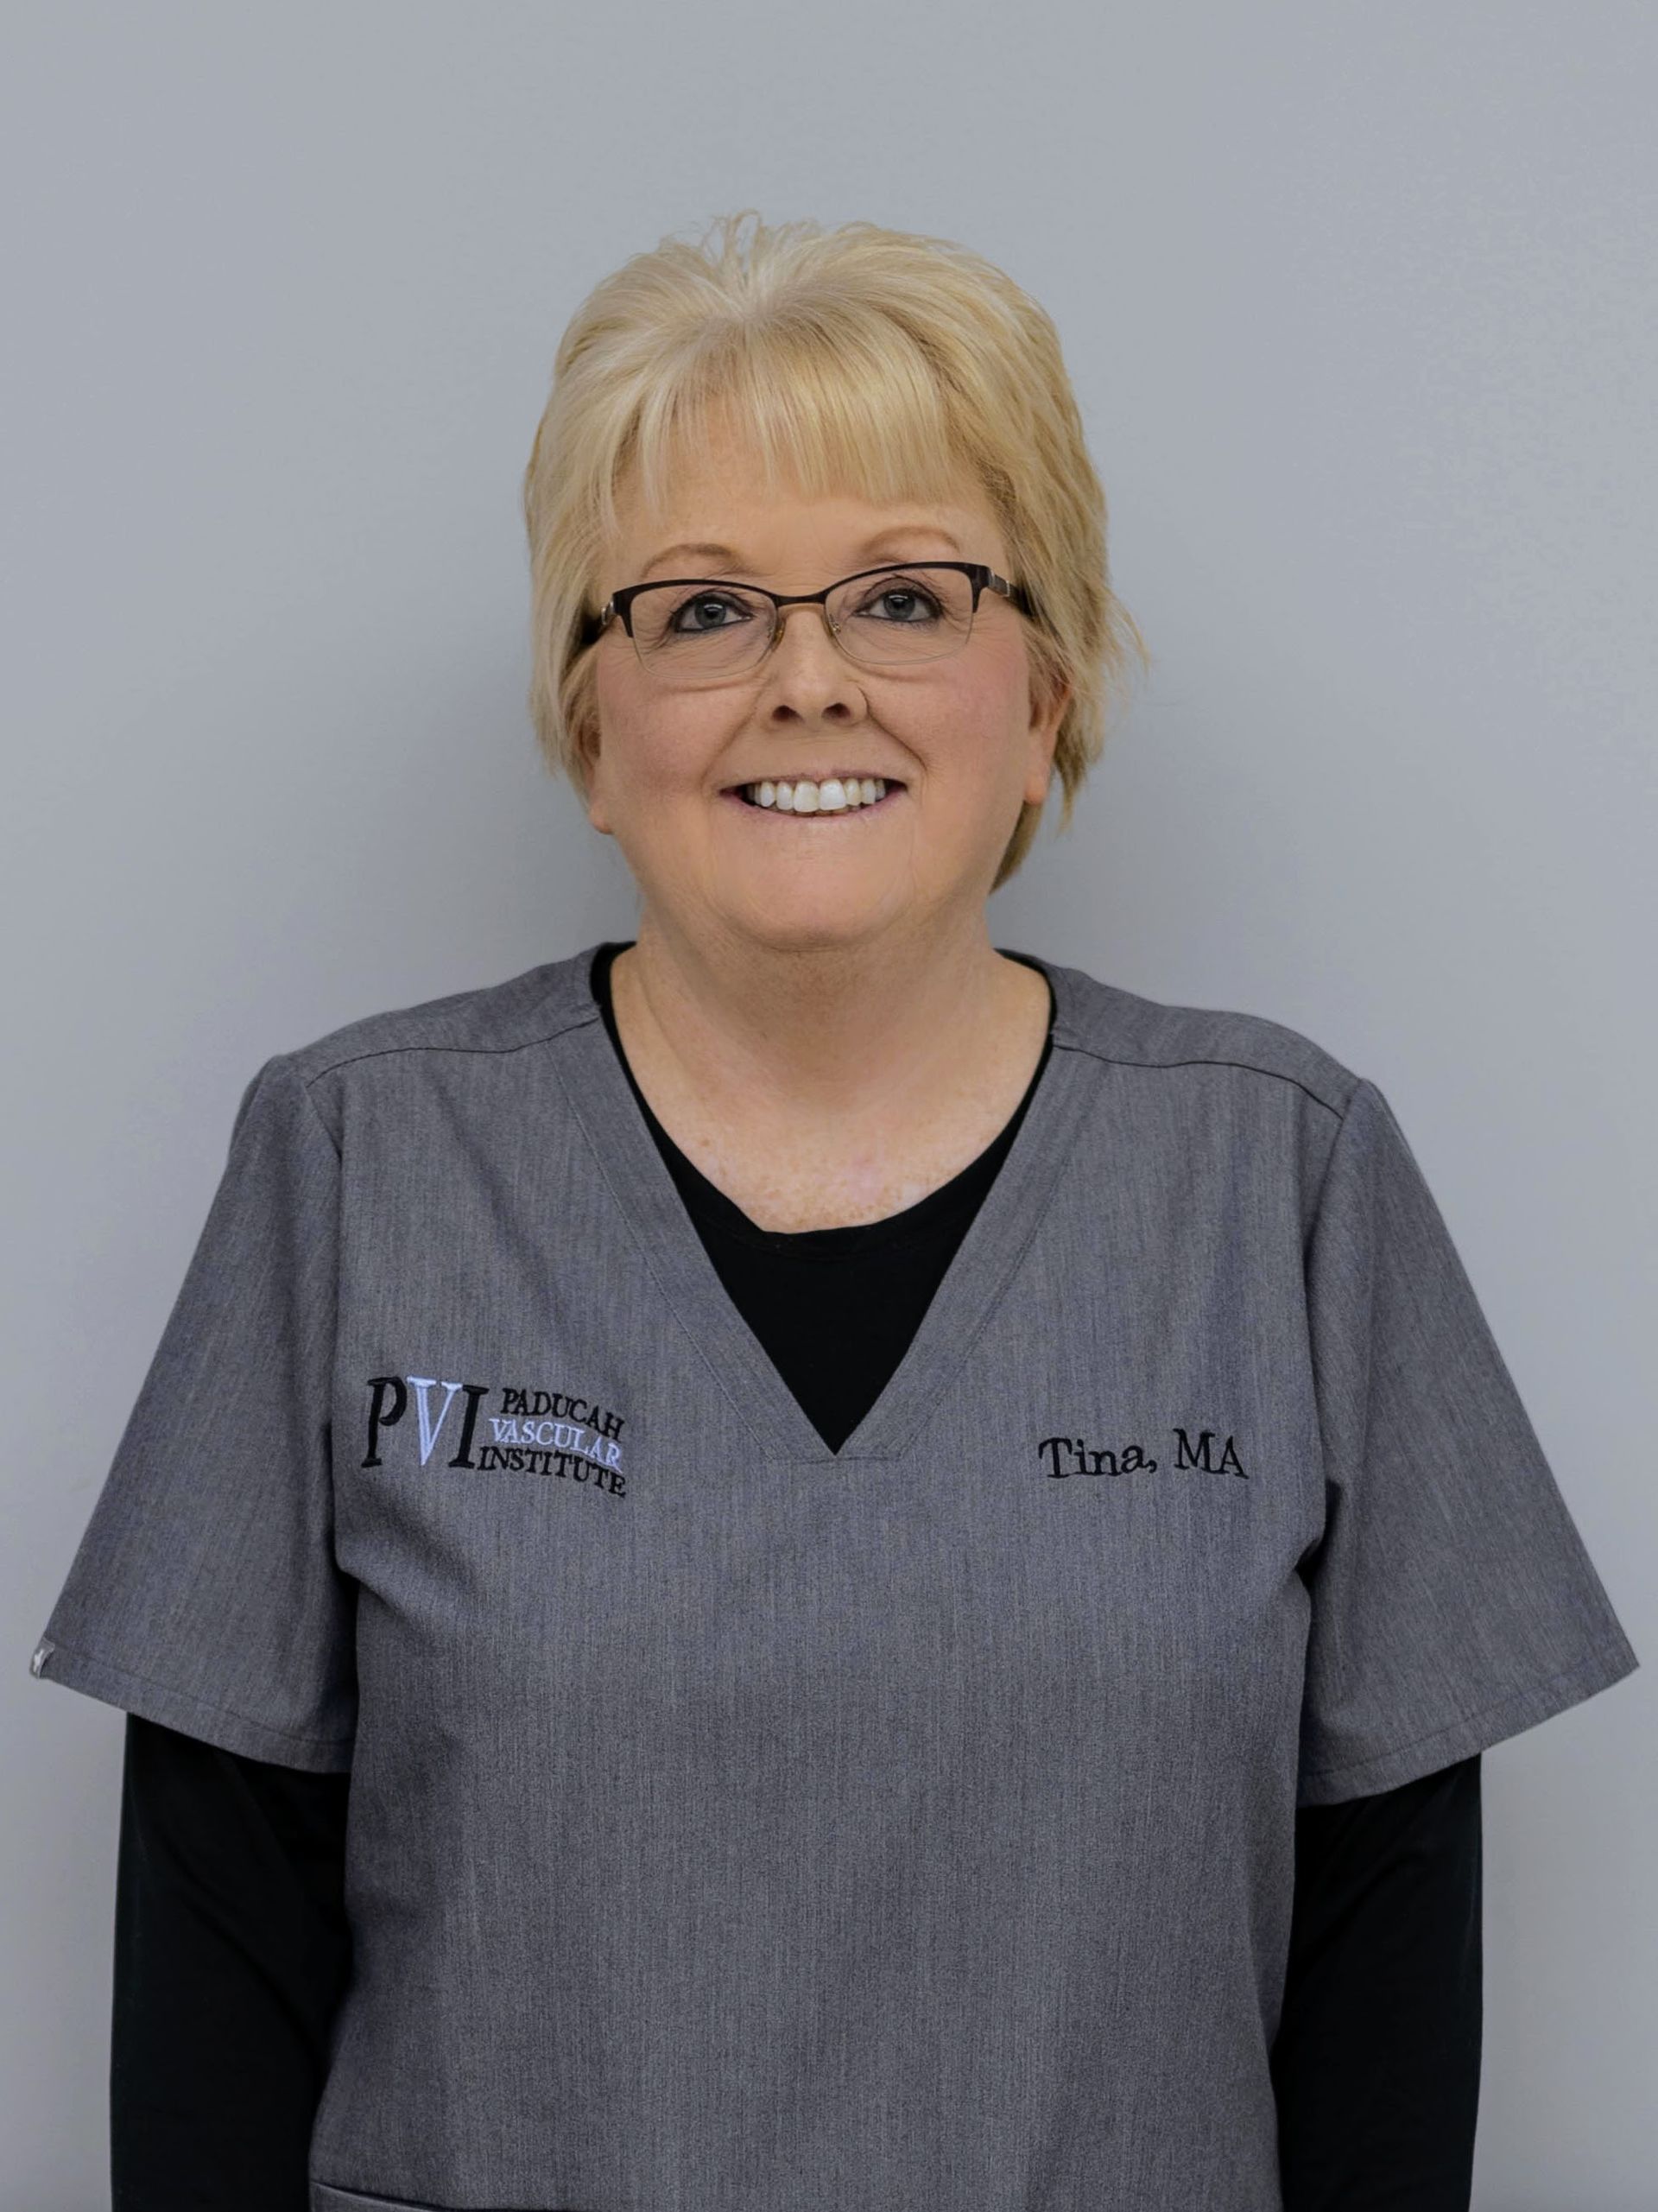 Tina Morehead, Medical Assistant, a woman wearing glasses and a scrub top that has paducah vascular institute logo on it